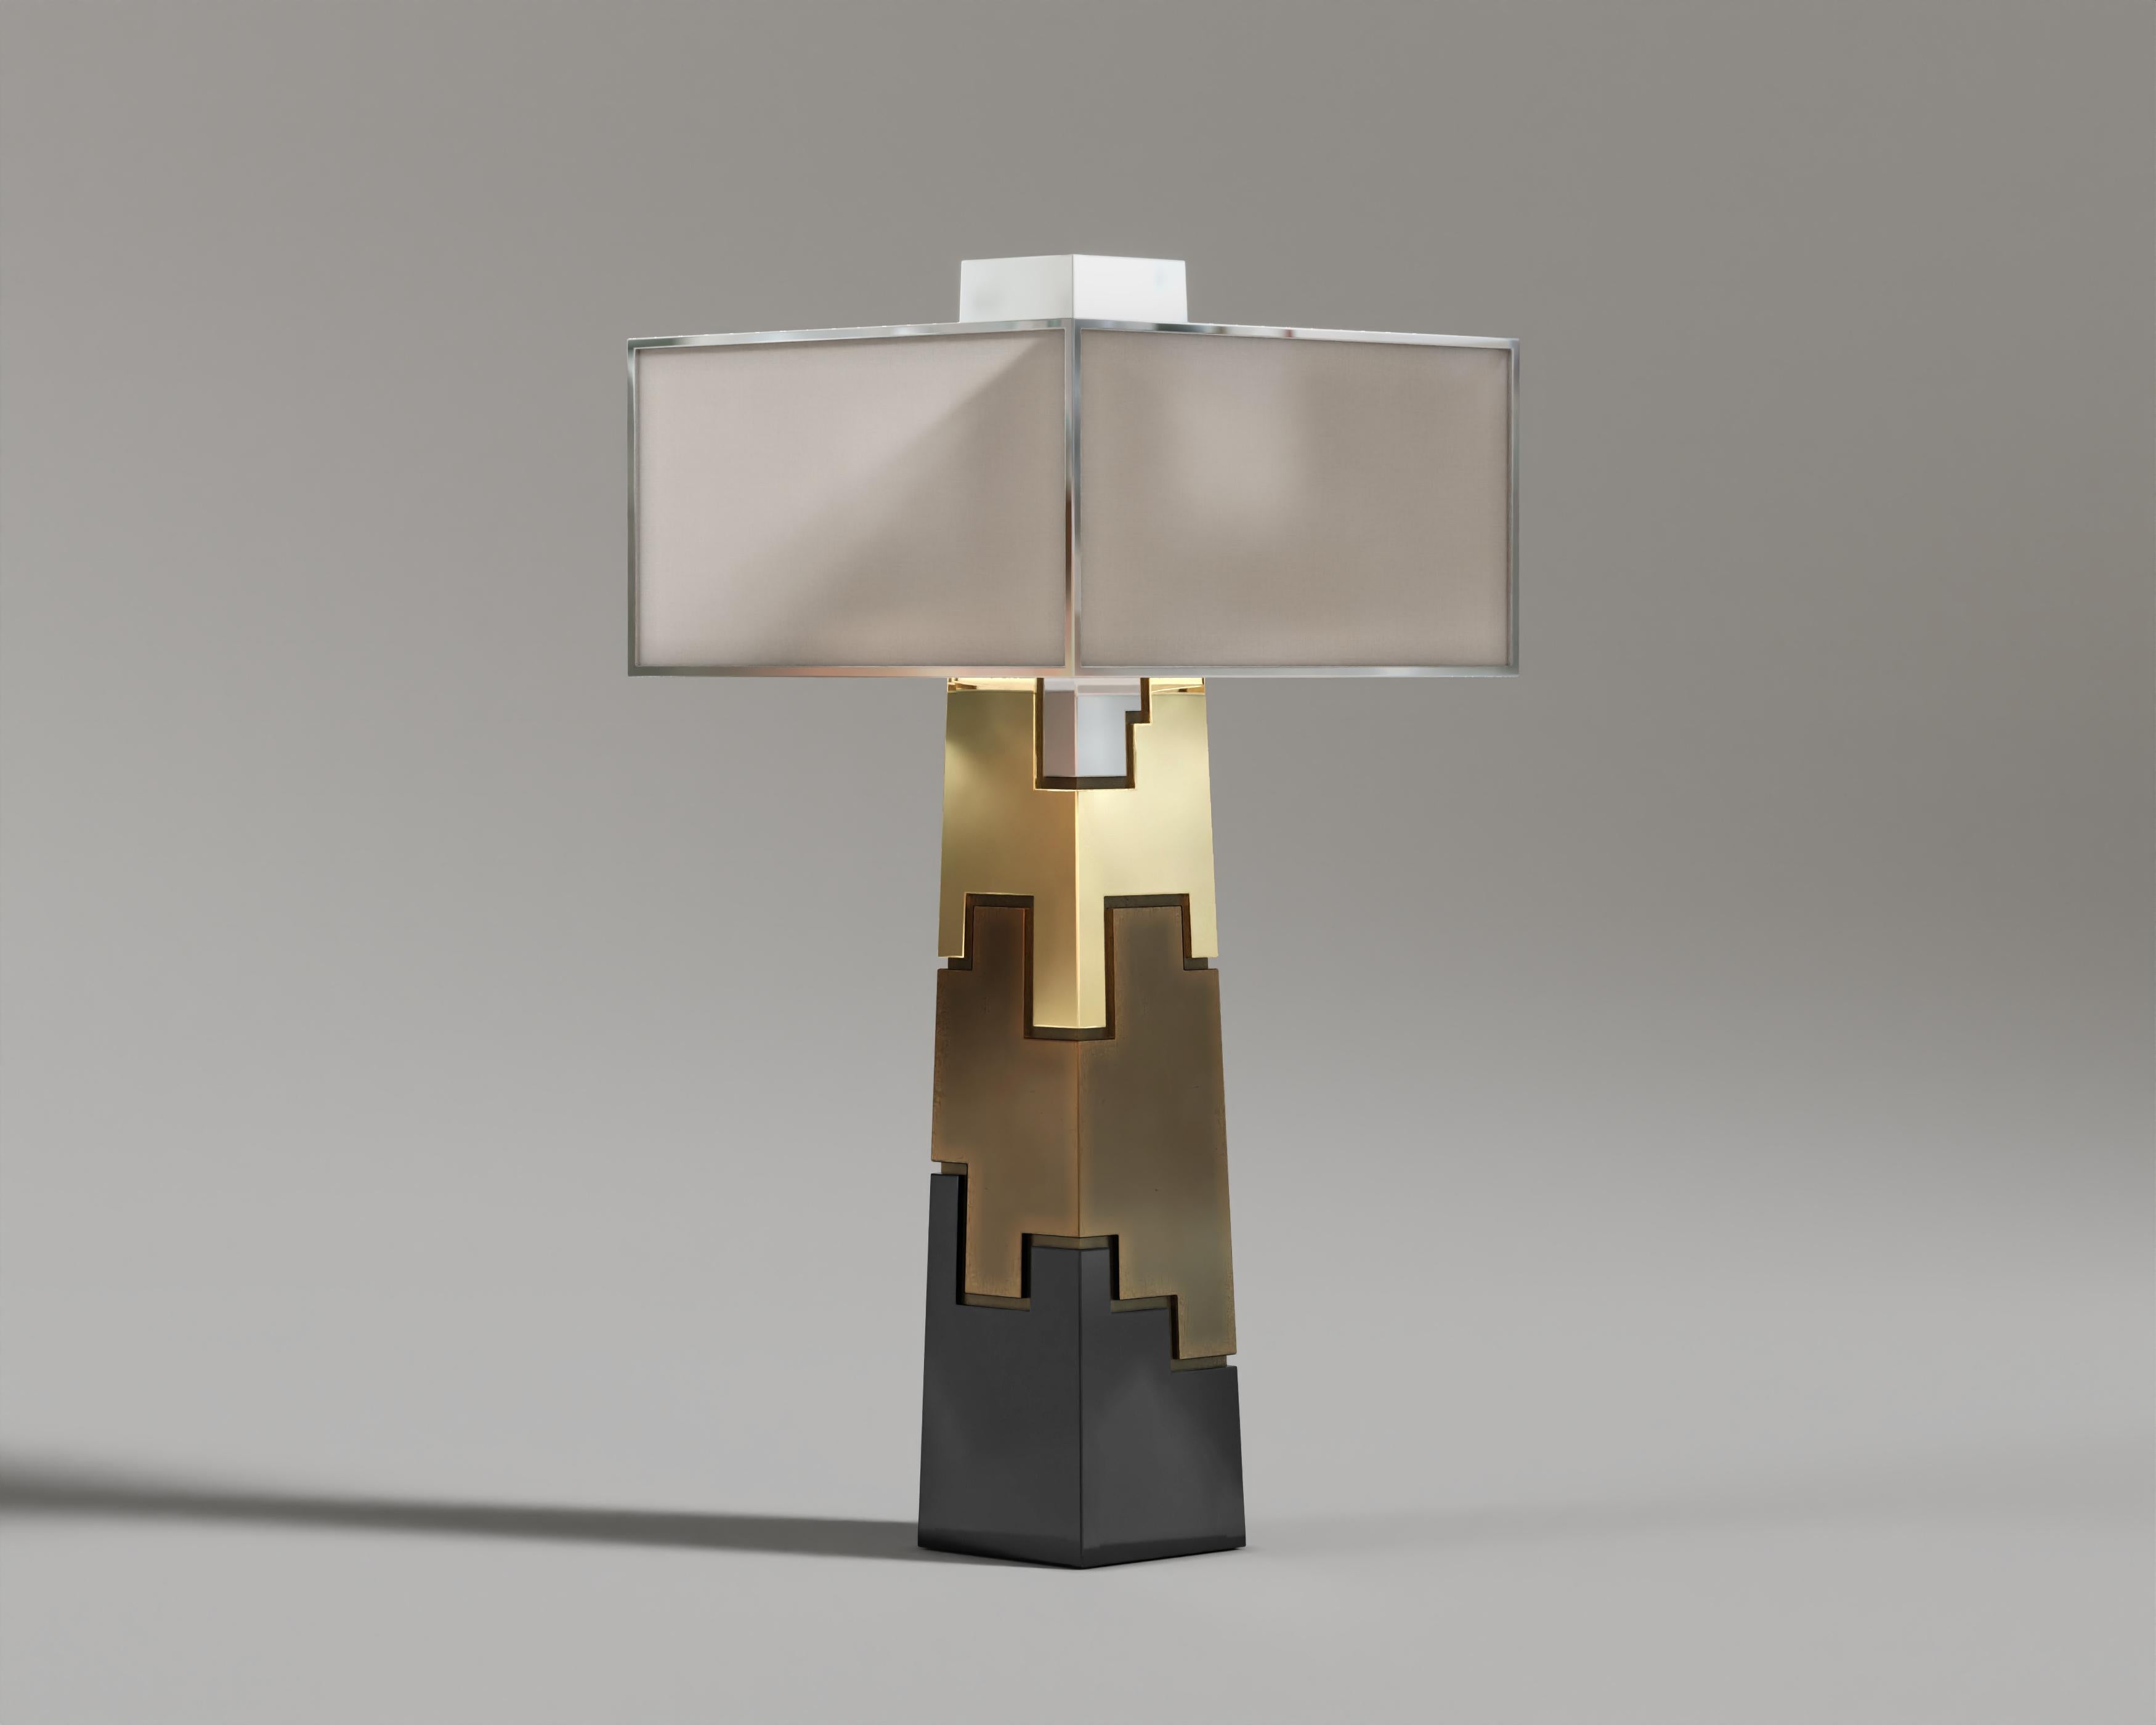 Fragmin Table Lamp

Elegant luxury Fragmin table lamp featuring a sleek cylindrical design, crafted with black lacquer, bronze accents, and rich veneer materials for a timeless and opulent aesthetic.

Materials and sizes are customizable upon the